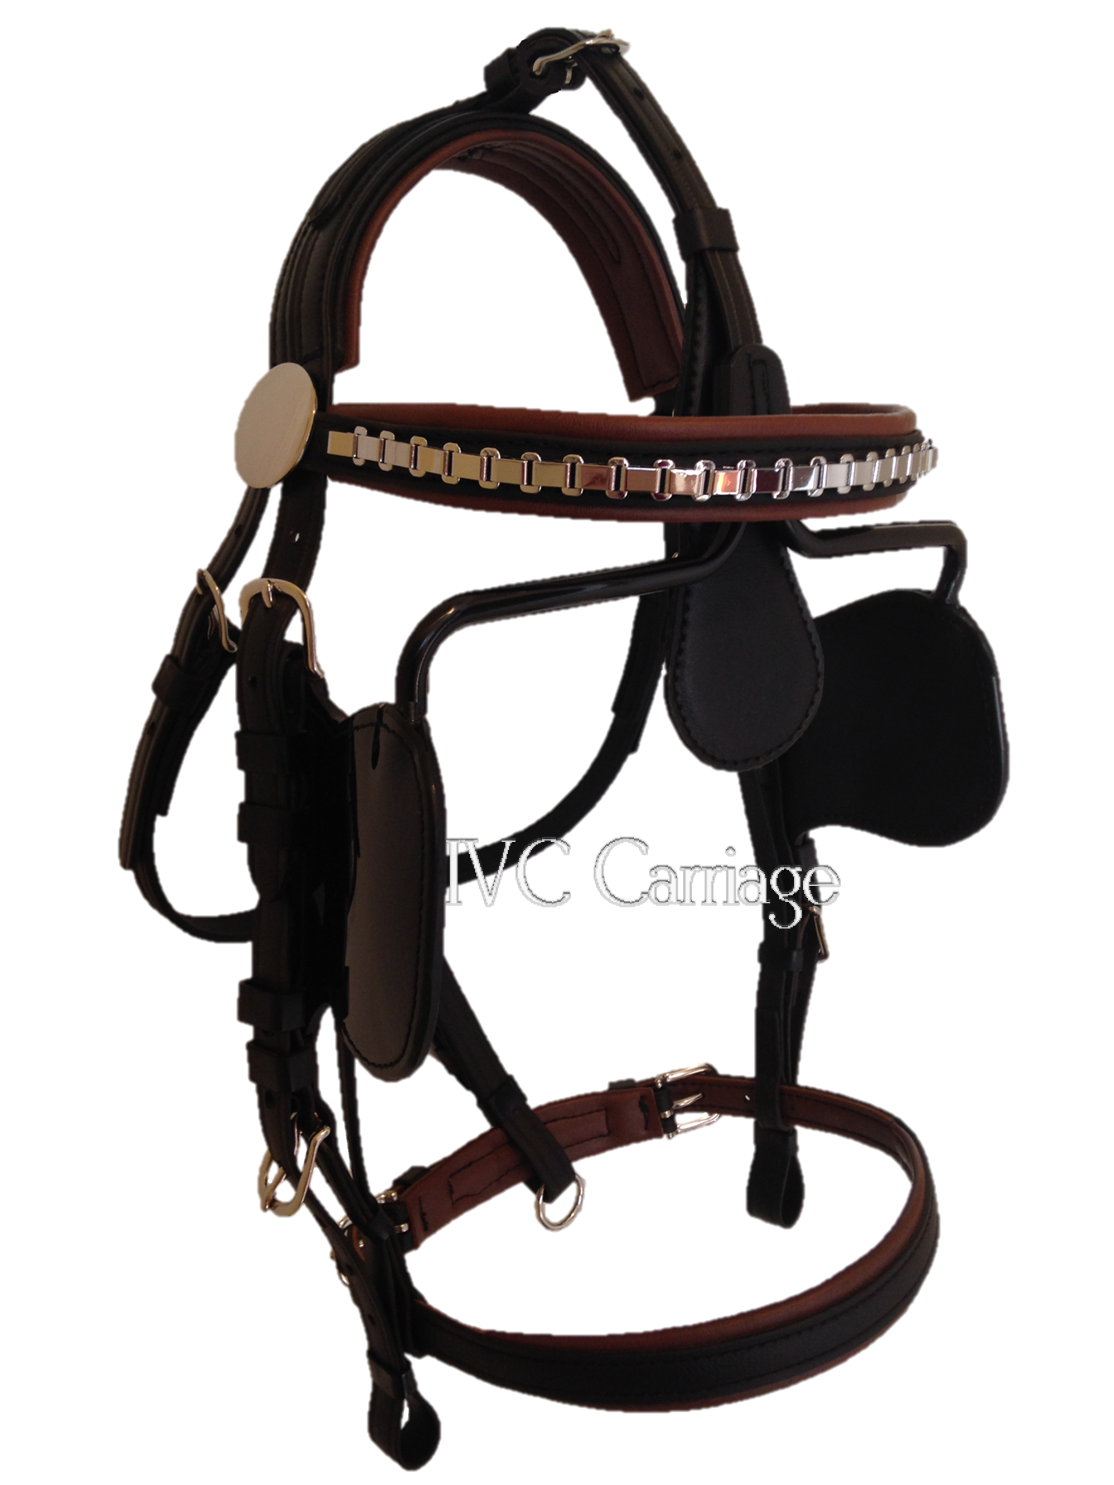 IVC Traditional Synthetic Horse Harness Bridle